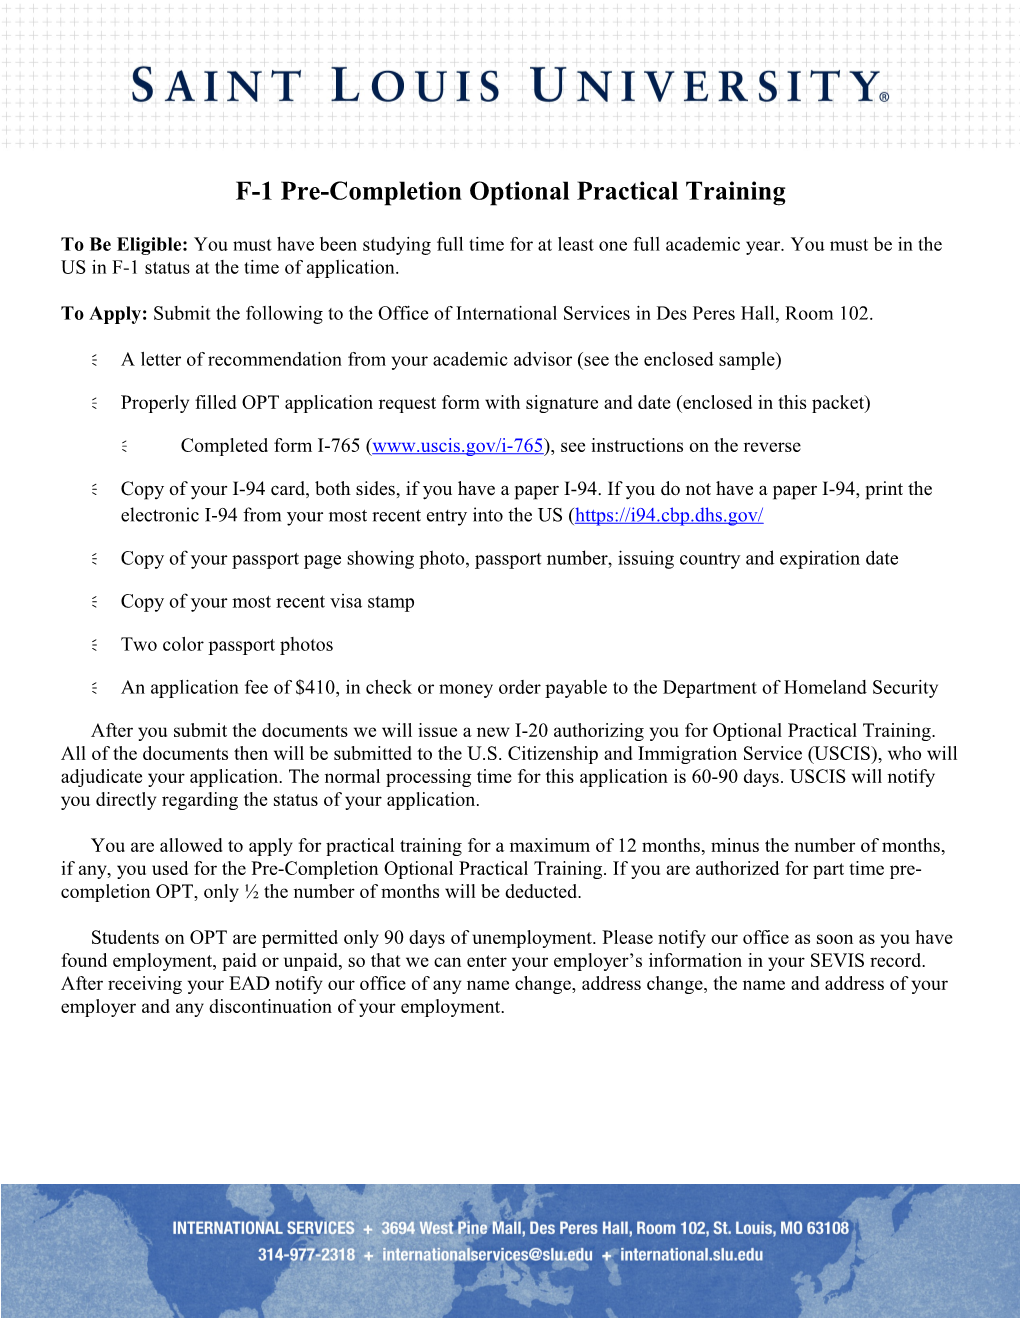 F-1 Pre-Completion Optional Practical Training